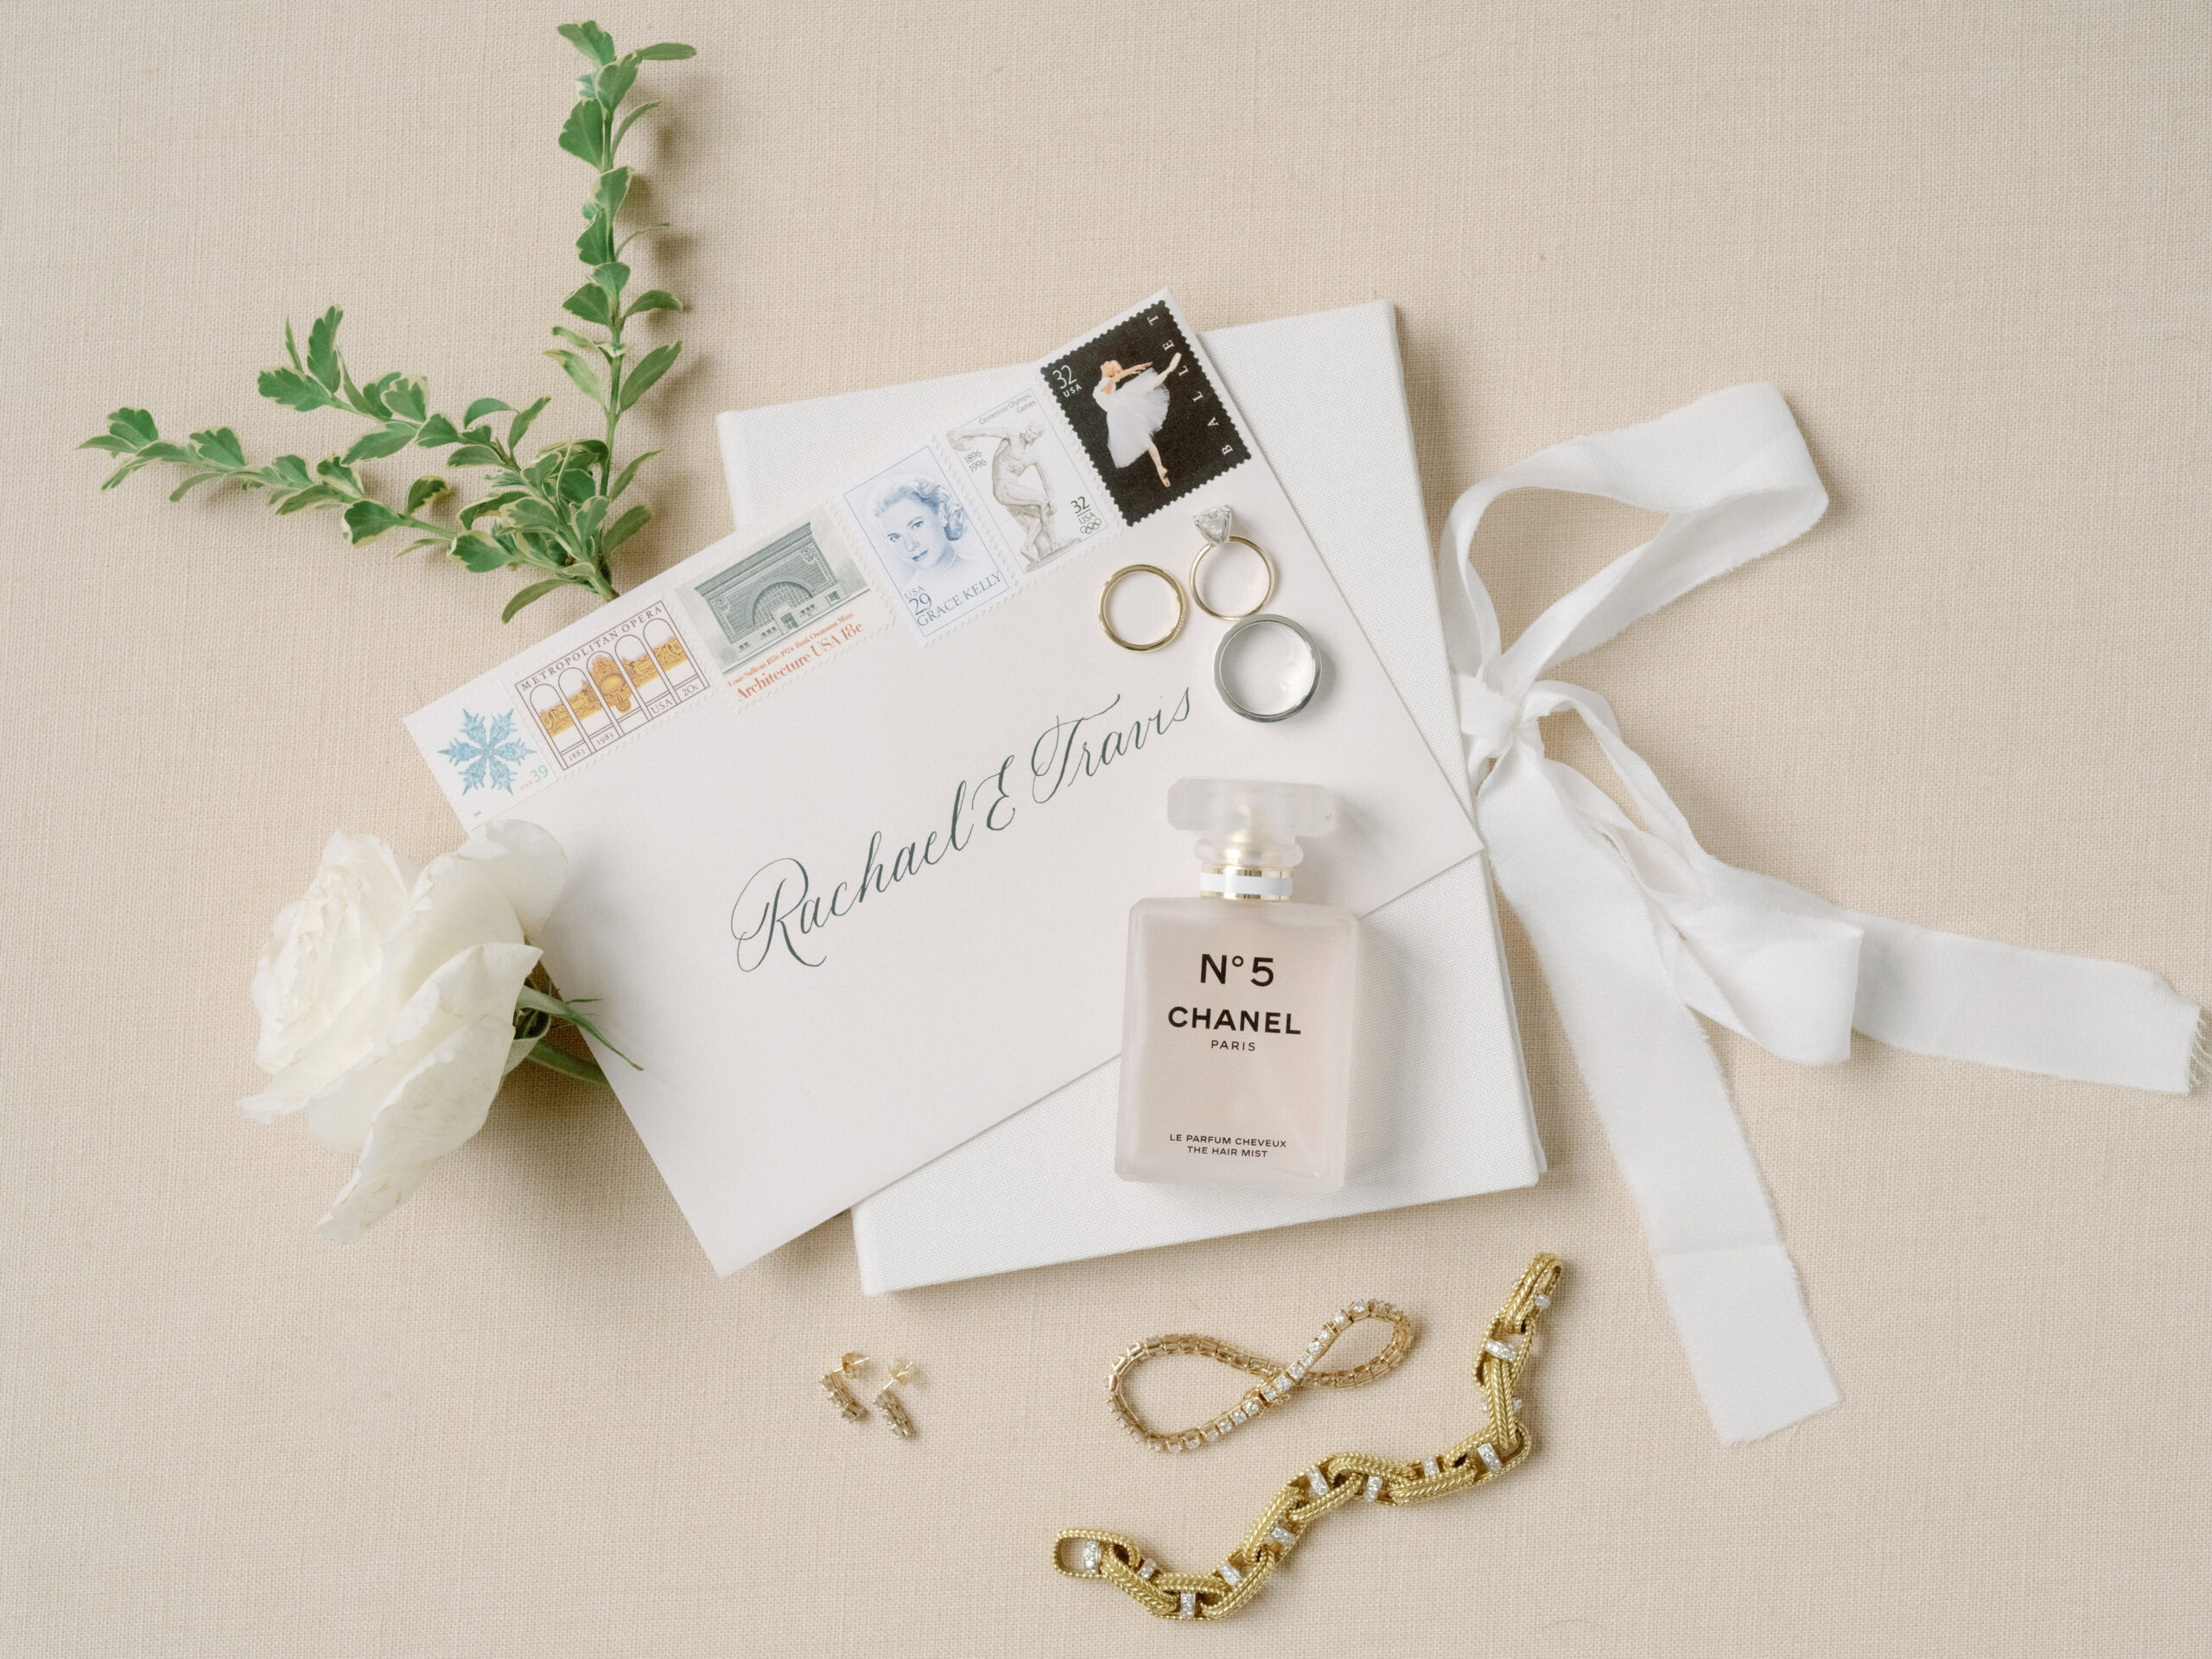 Invitation and accessories for a wedding. Wedding Trends image by Jenny Fu Studio